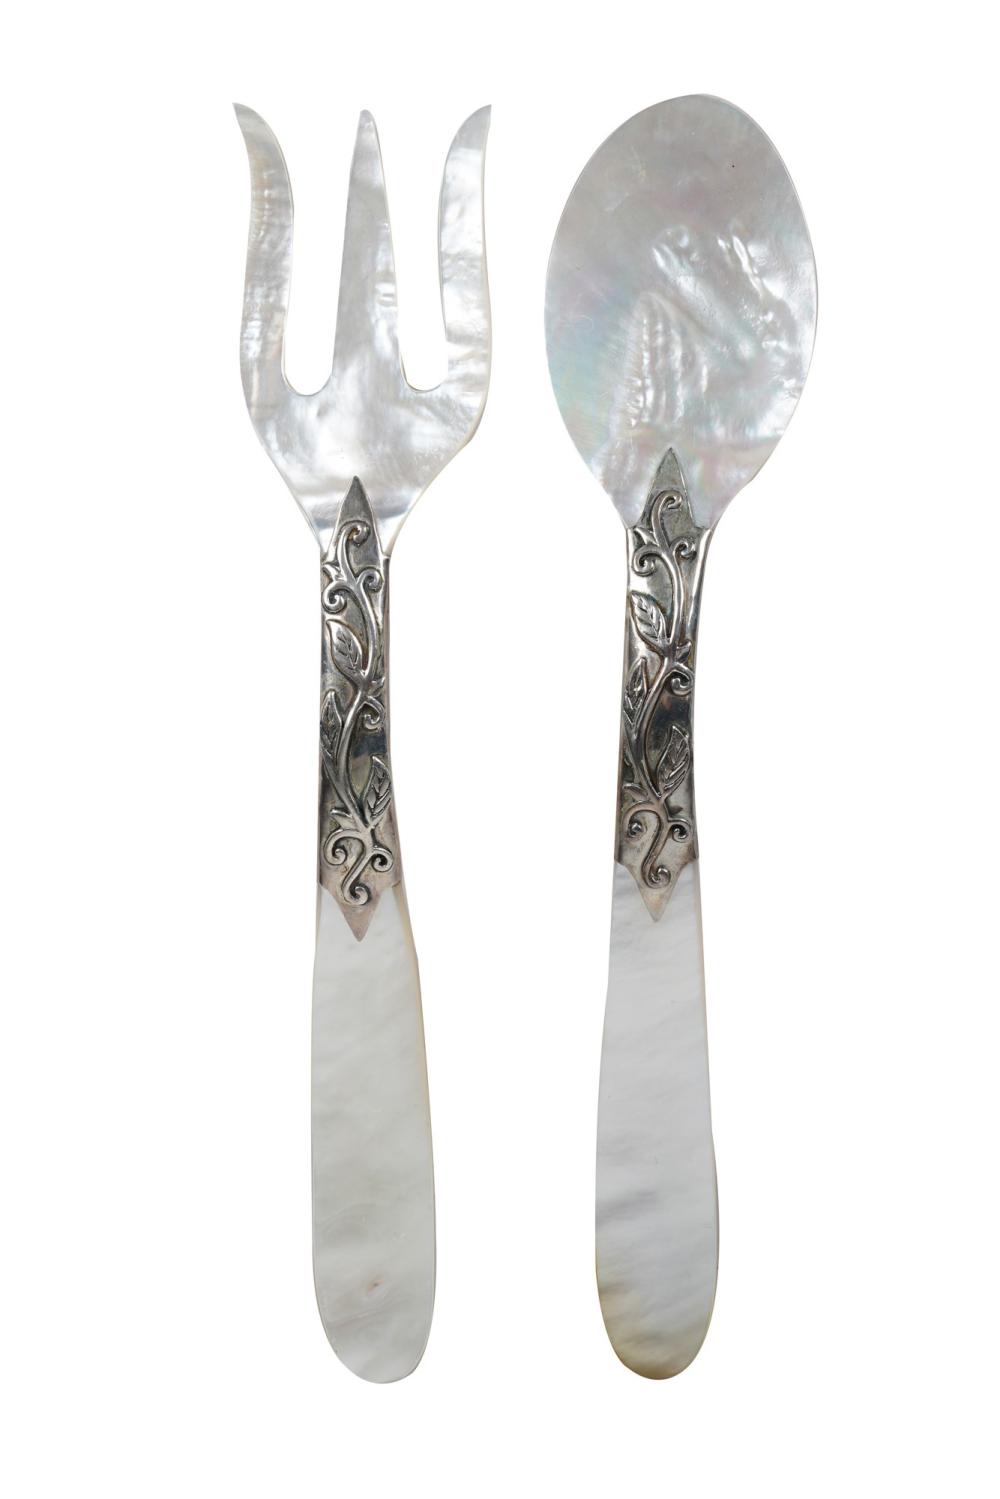 PAIR OF STERLING & MOTHER OF PEARL